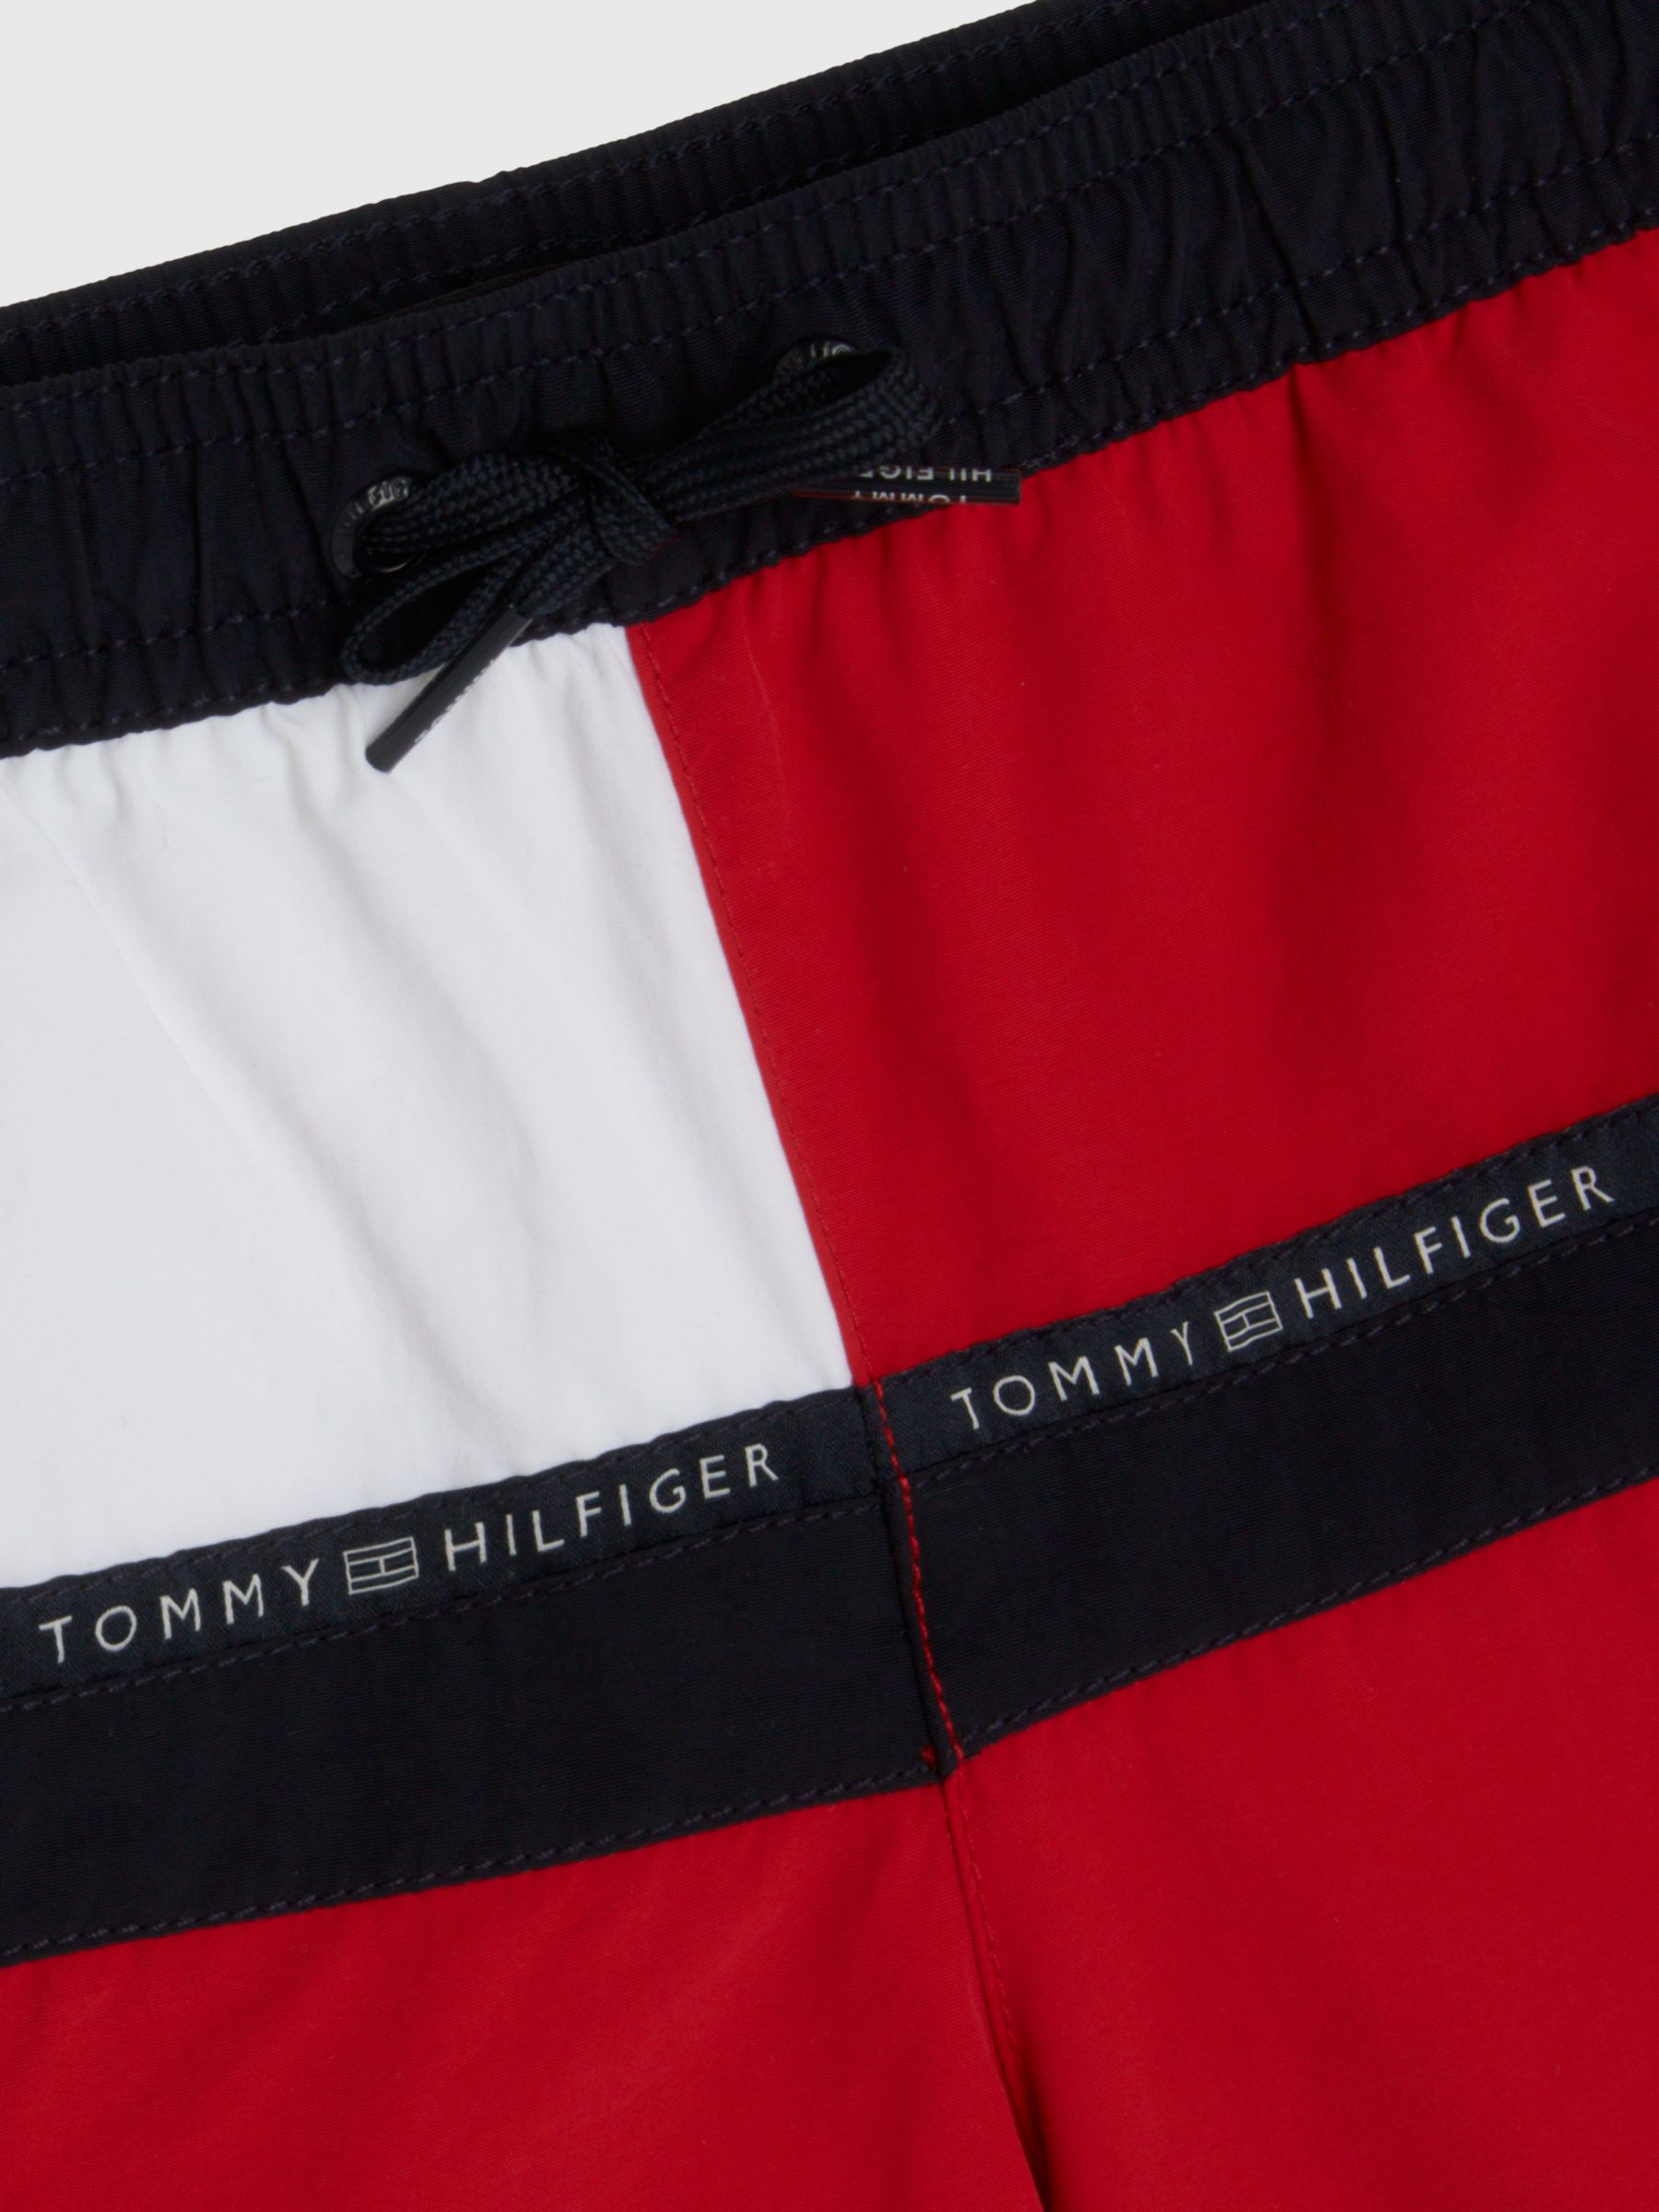 Tommy Hilfiger Kids' Core Flag Swim Shorts, Primary Red, 10-12 years